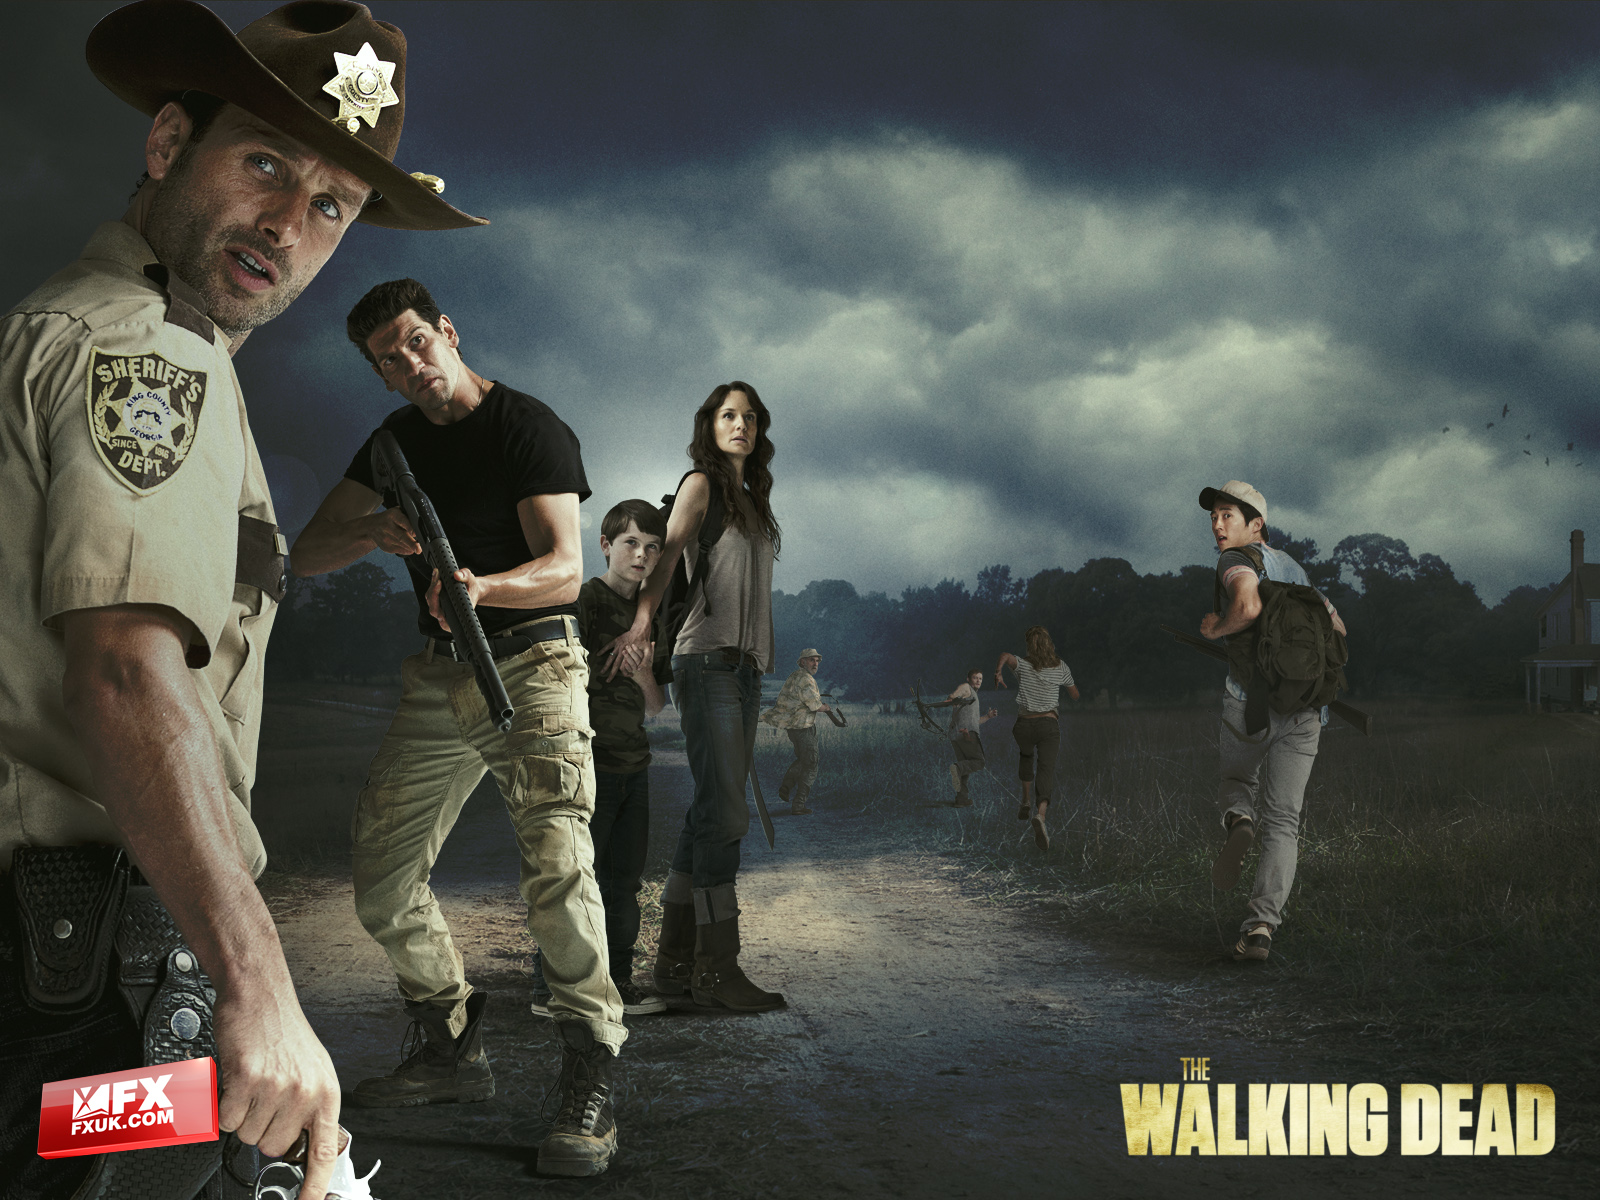 Download High quality The Walking Dead wallpaper / Movies / 1600x1200